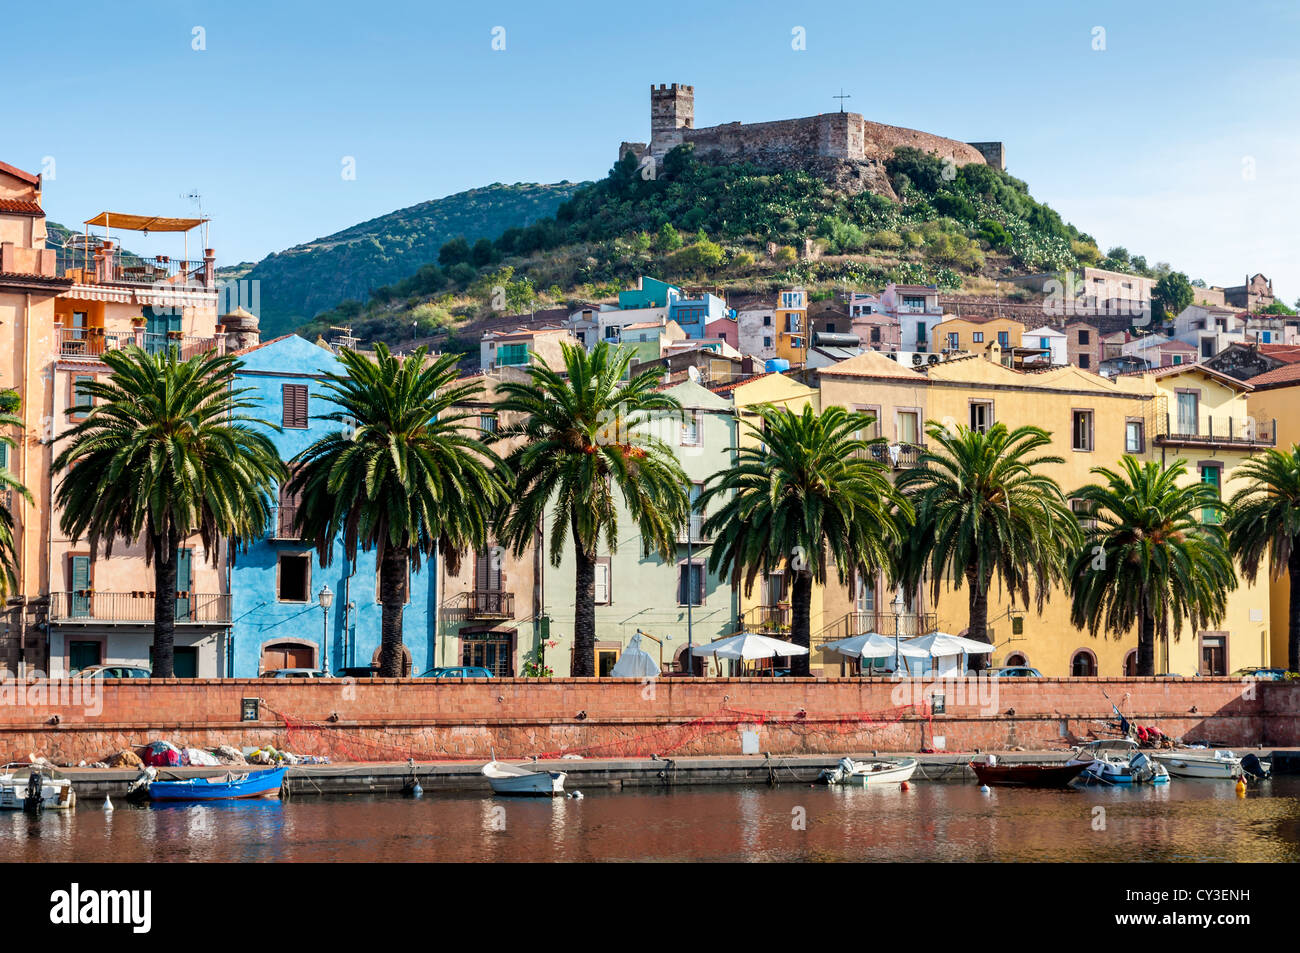 View of the river, the town of Bosa and the old fort on the island of Sardinia in Italy Stock Photo